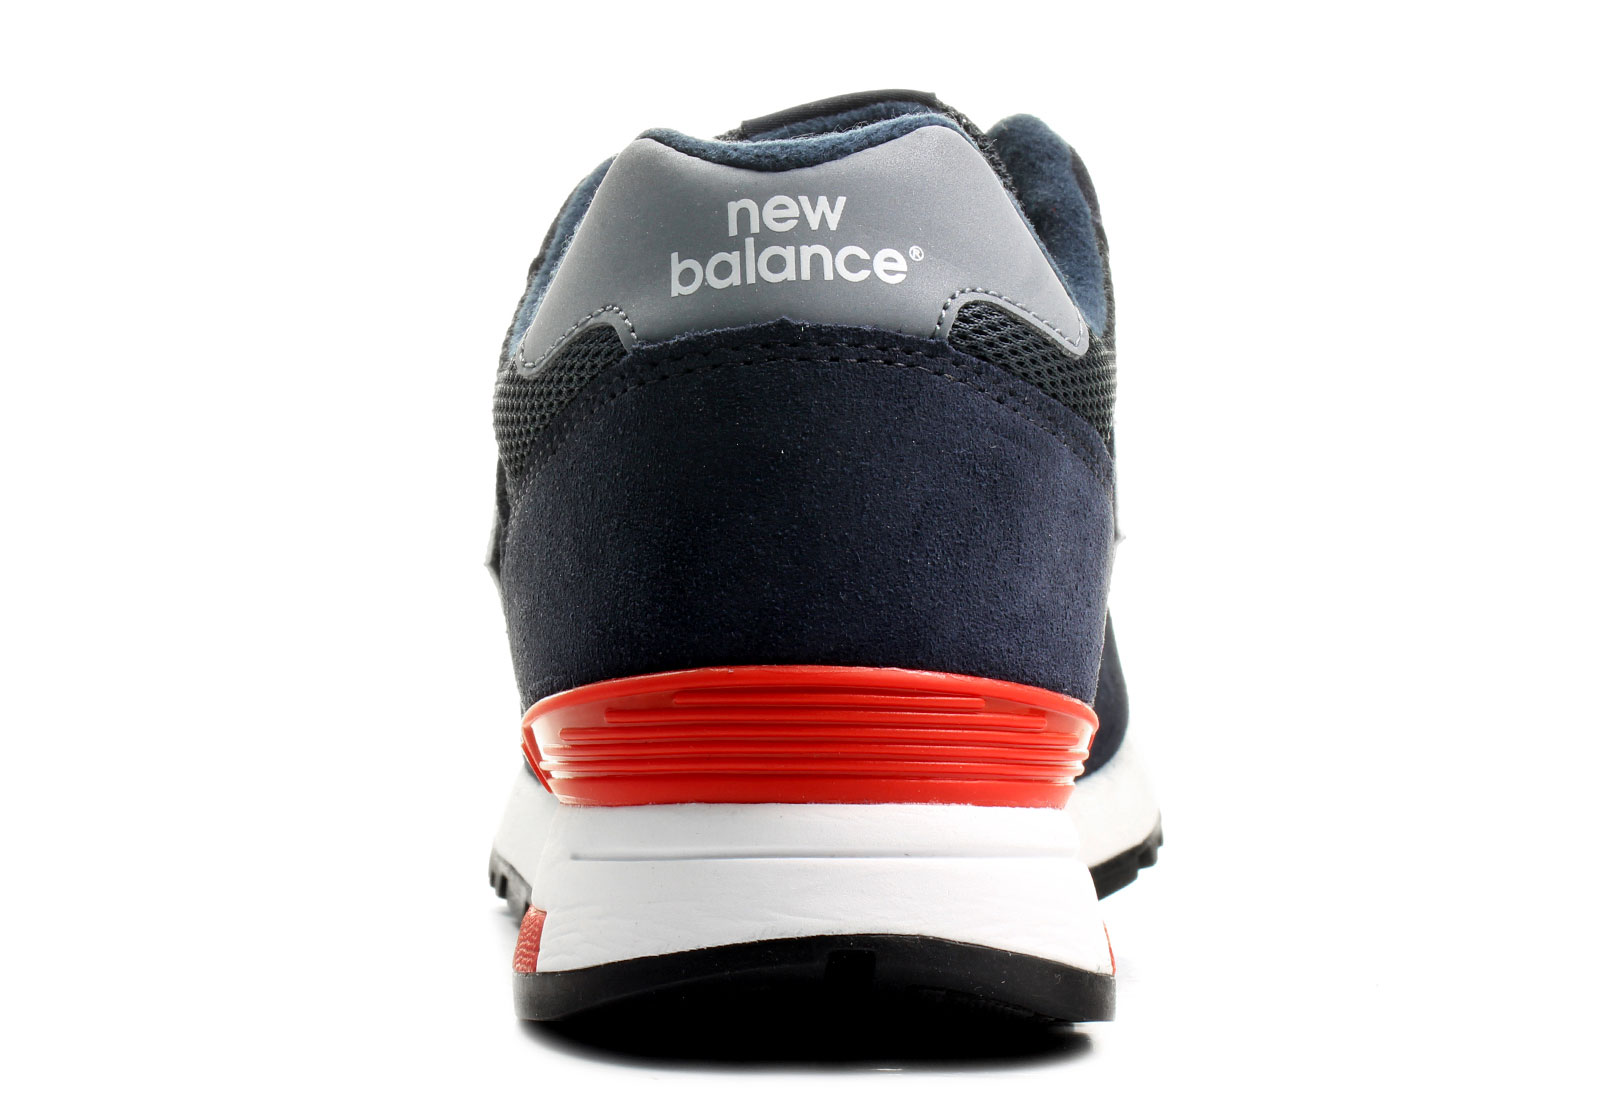 New Balance Shoes - Ml565 - ML565NBR - Online shop for sneakers, shoes